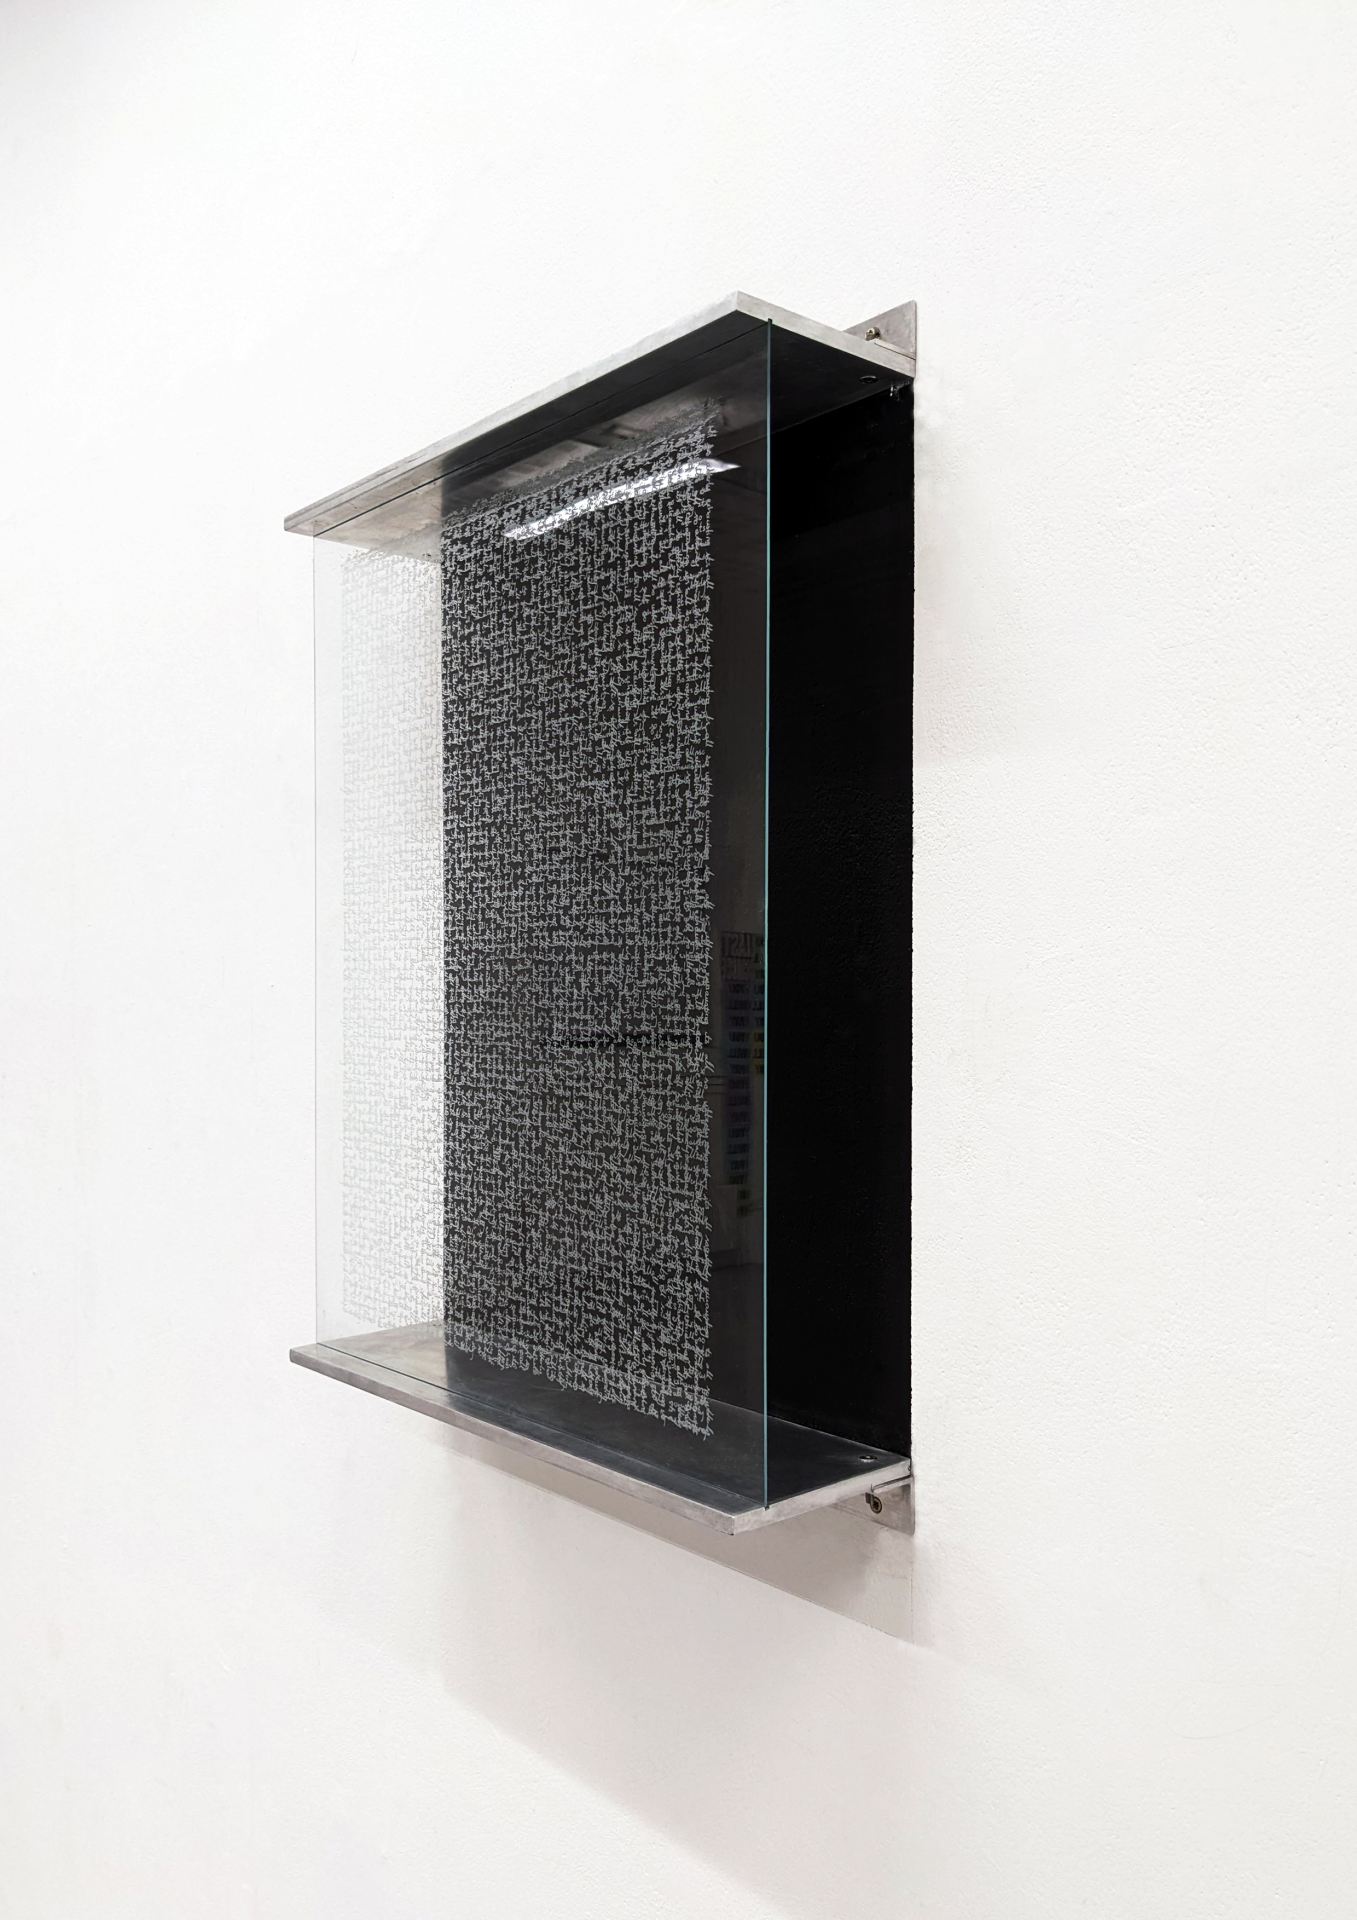 An image of a black object with a glass front, mounted on a white wall.